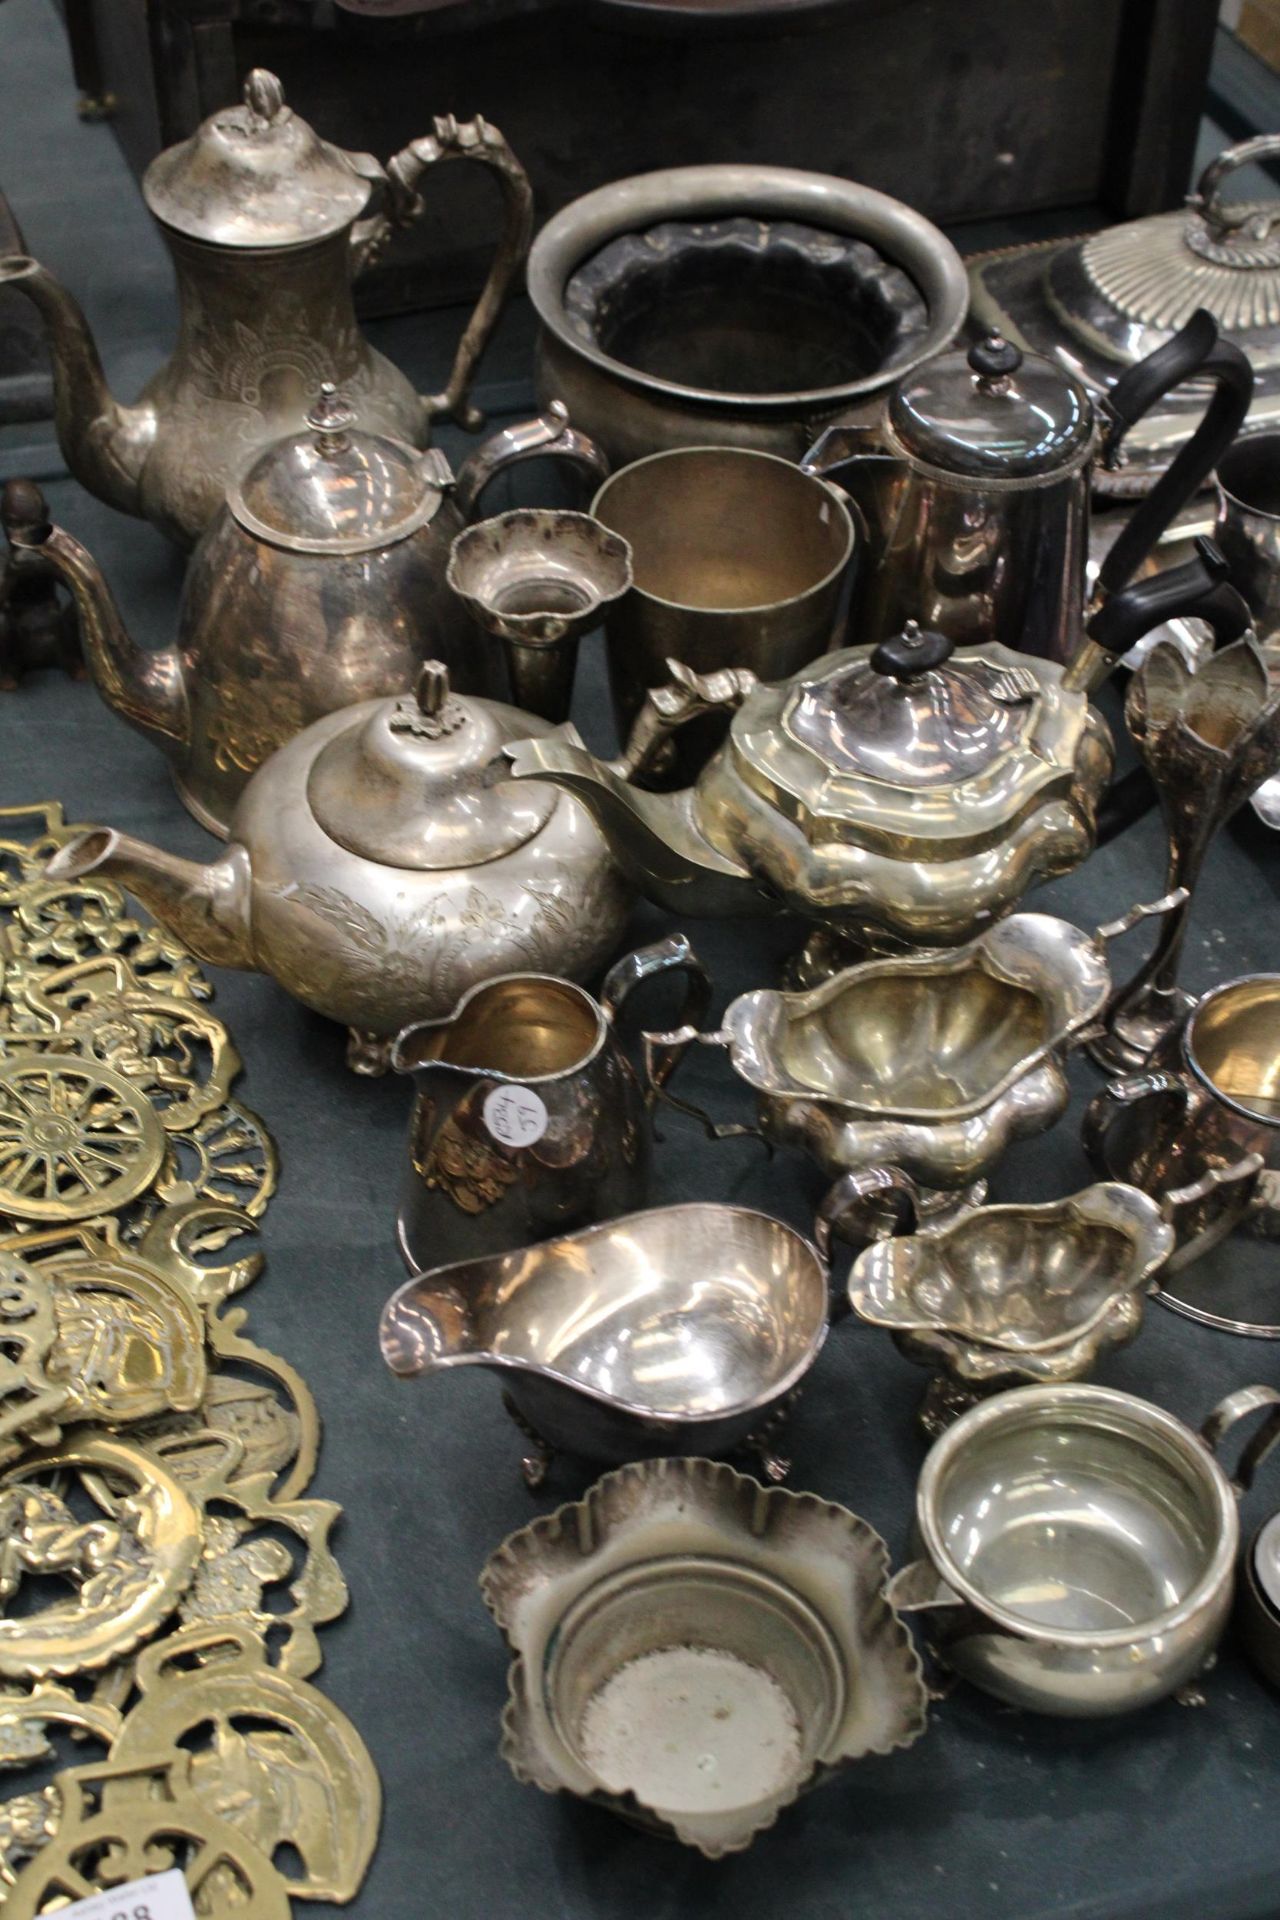 A VERY LARGE QUANTITY OF SILVER PLATED ITEMS TO INCLUDE TEAPOTS, COFFEE POTS, SERVING DISHES, - Image 3 of 6